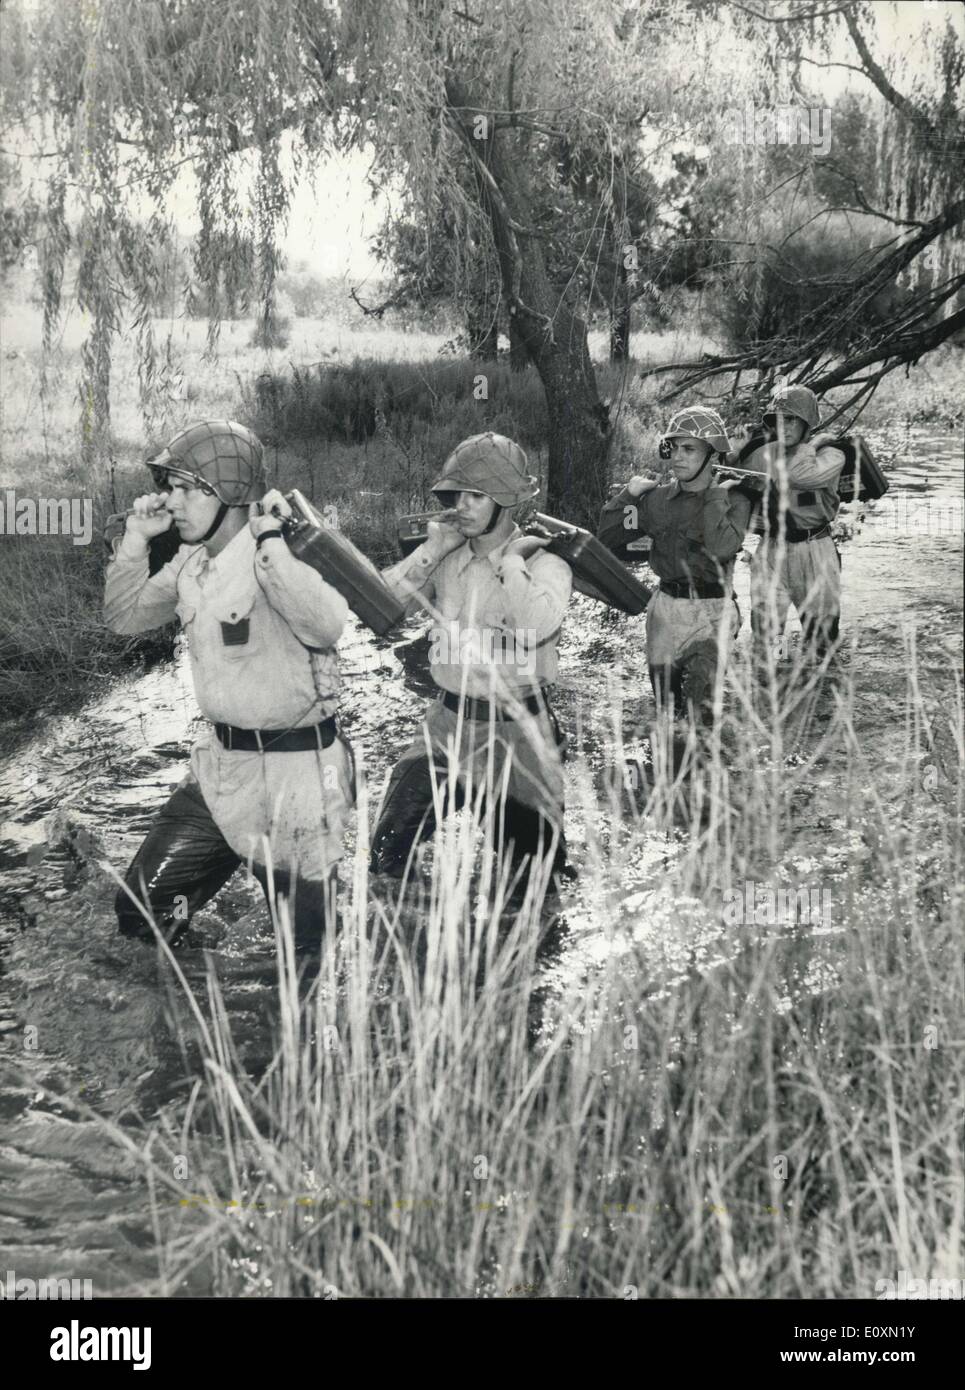 Apr. 08, 1967 - Argentinas Military Forces are Doing ''Realistic Anti Guerrillas Training'': Near Ezeiza air port, some 25 kilimeters of teh argentine capital there are taking place actually instructions to cadets of the Gendarmeria National at the most realistic way possible to be prepared to fight against the increasing of the Castro-communist Guerrilla activities on the argentine-bolivian frontier- Here are members of the argentine Gendarmeria Nacional during their realistic maneuvers against guerrillas. Stock Photo